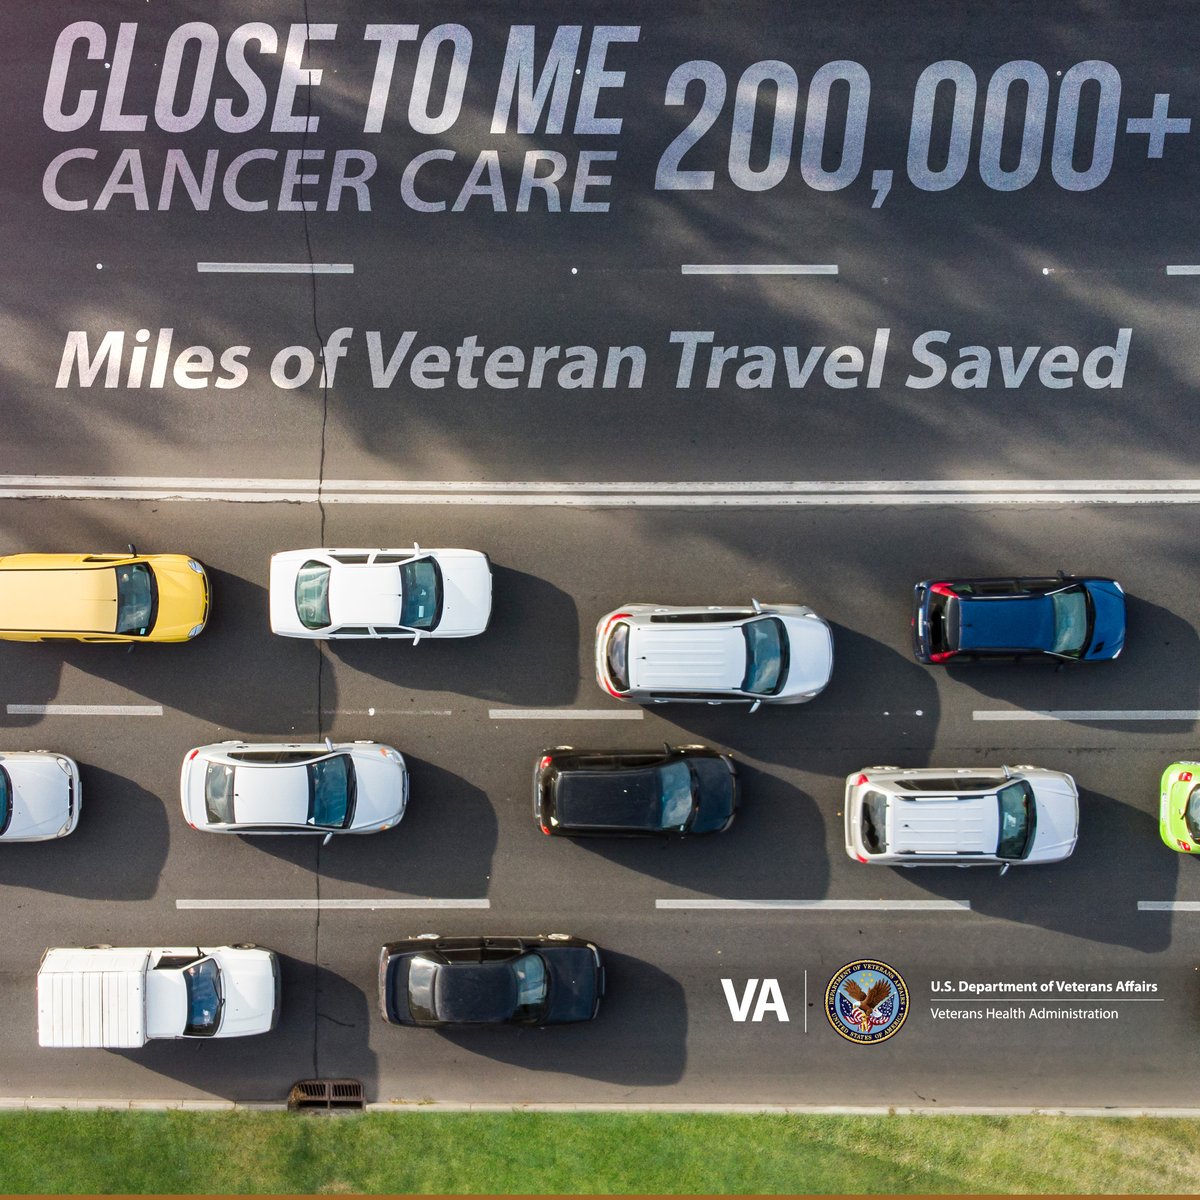 We’re striving for every Veteran in need having an option to choose VA for their cancer care by expanding access into our Veteran’s communities. That’s what VA’s Close to Me Cancer Care service does.
cancer.va.gov/oncology-servi… #Cancer #BidenCancerMoonshot #VAClosetoMe